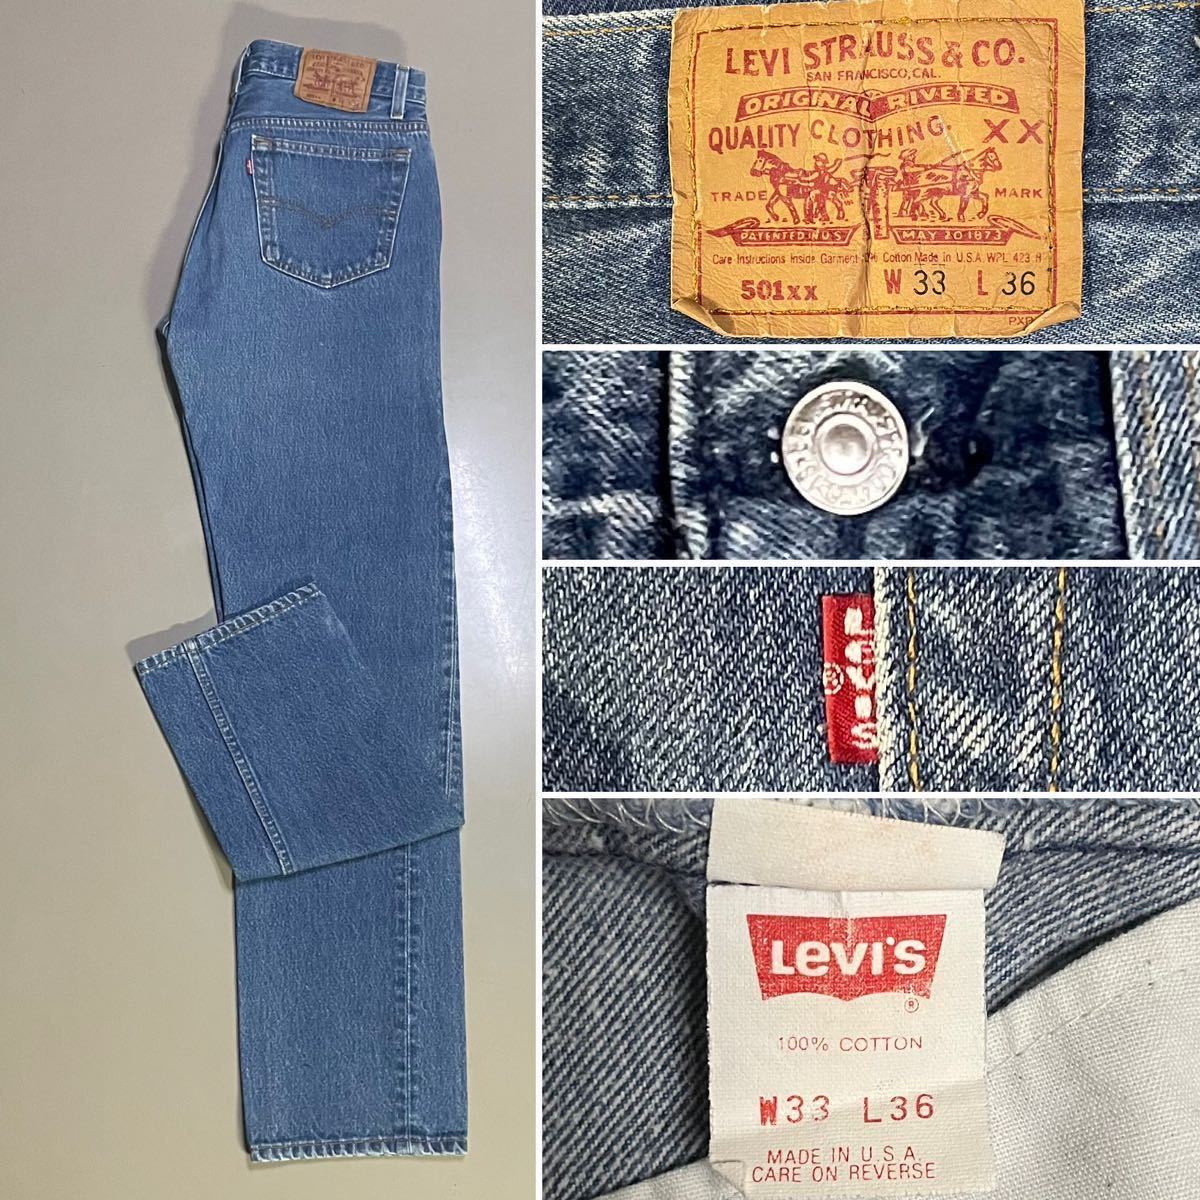 1990s Levi’s 501 Denim Pant. Made in USA. Size W33 L36